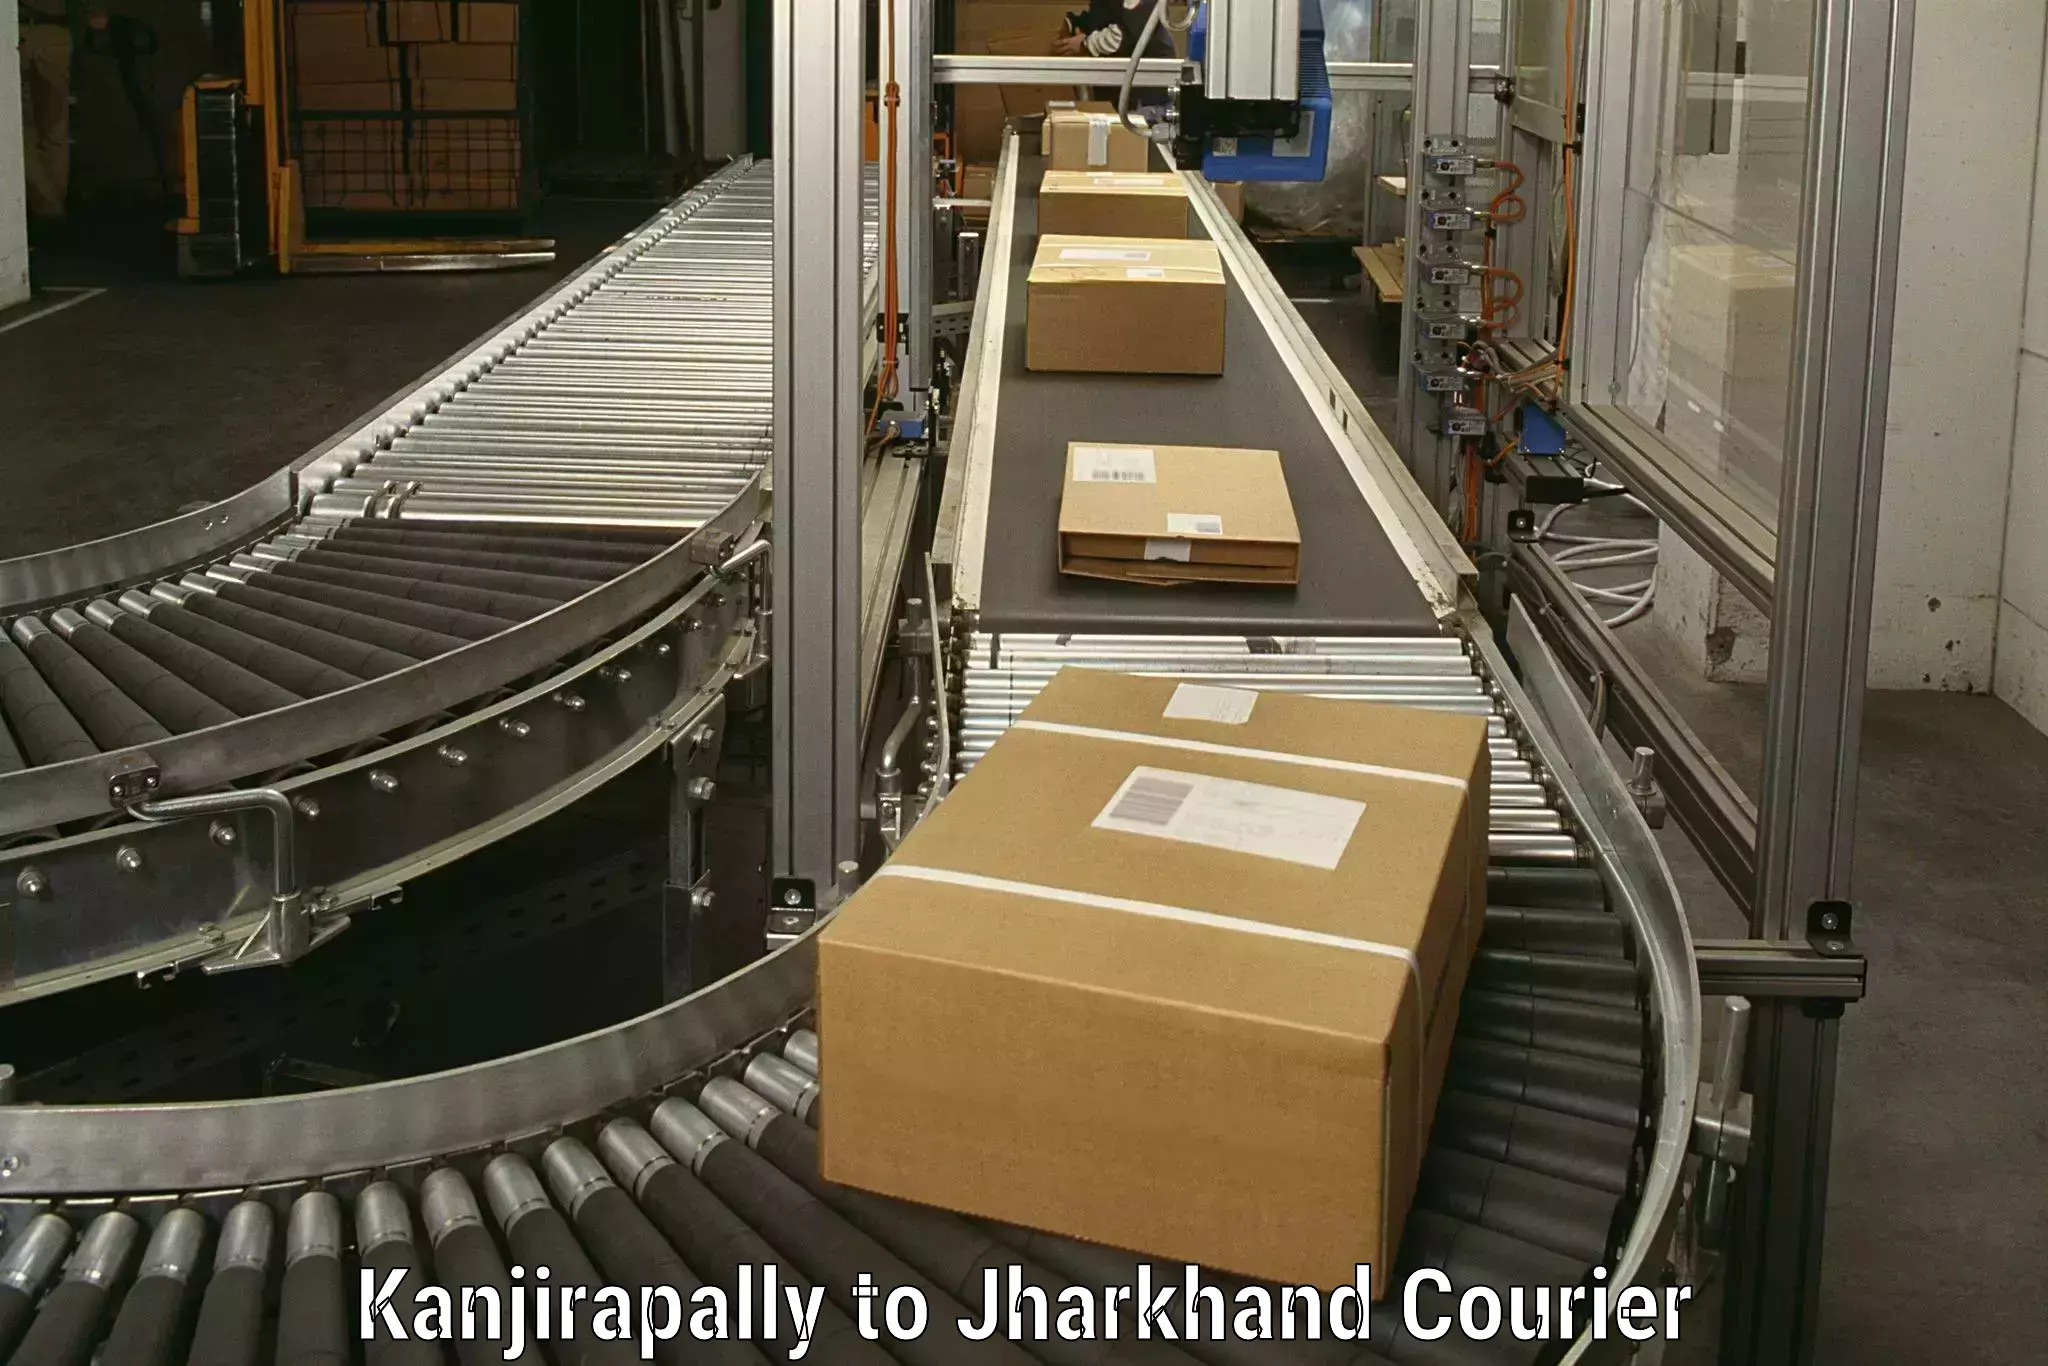 Hassle-free relocation in Kanjirapally to Jharkhand